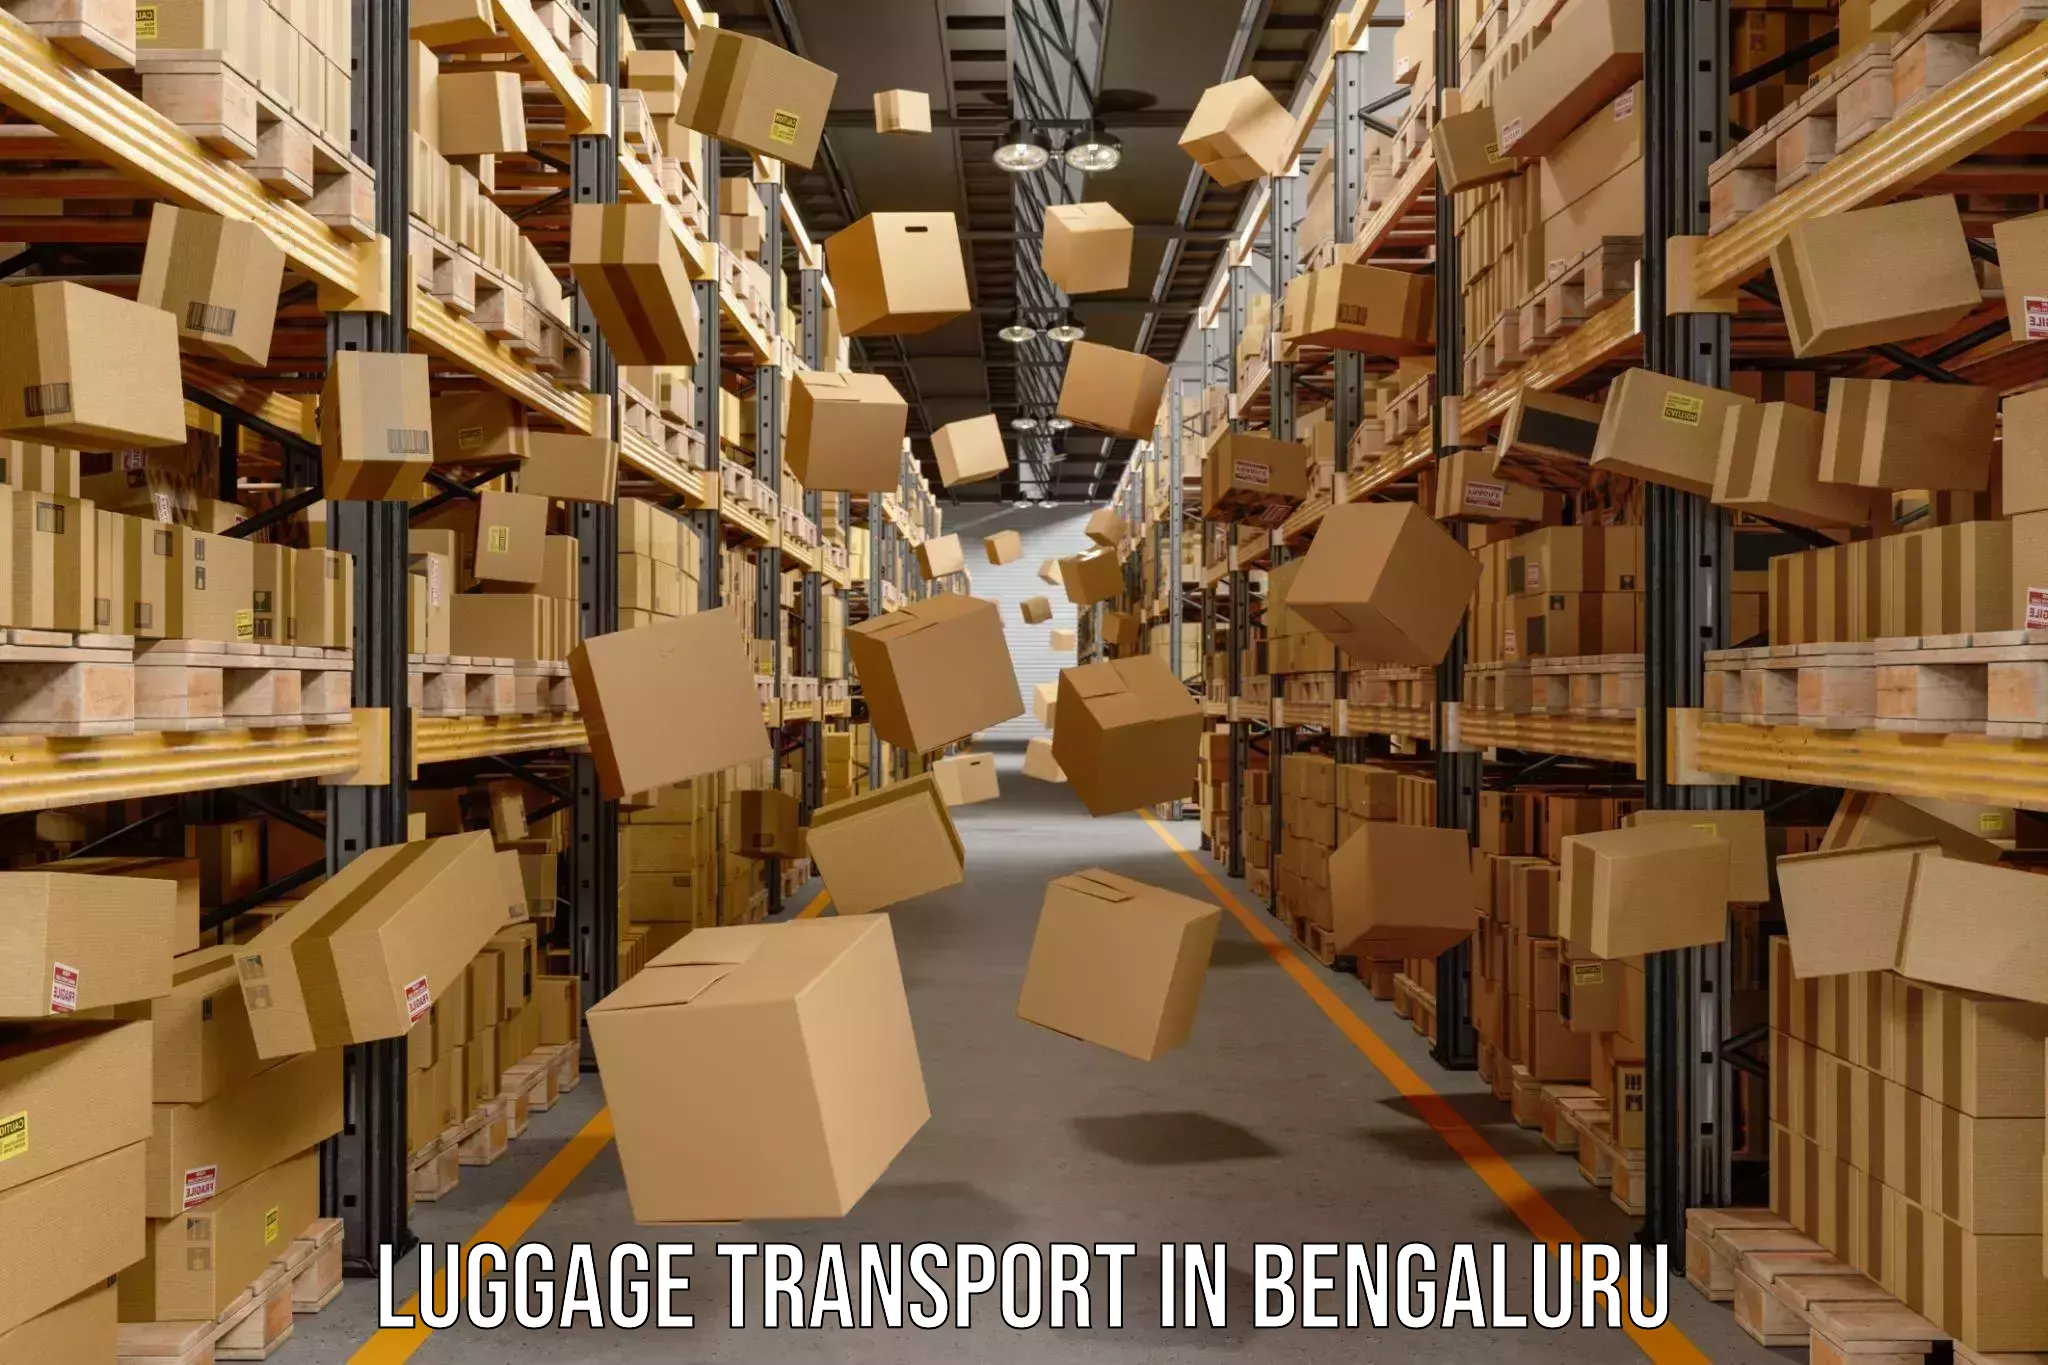 Luggage delivery system in Bengaluru